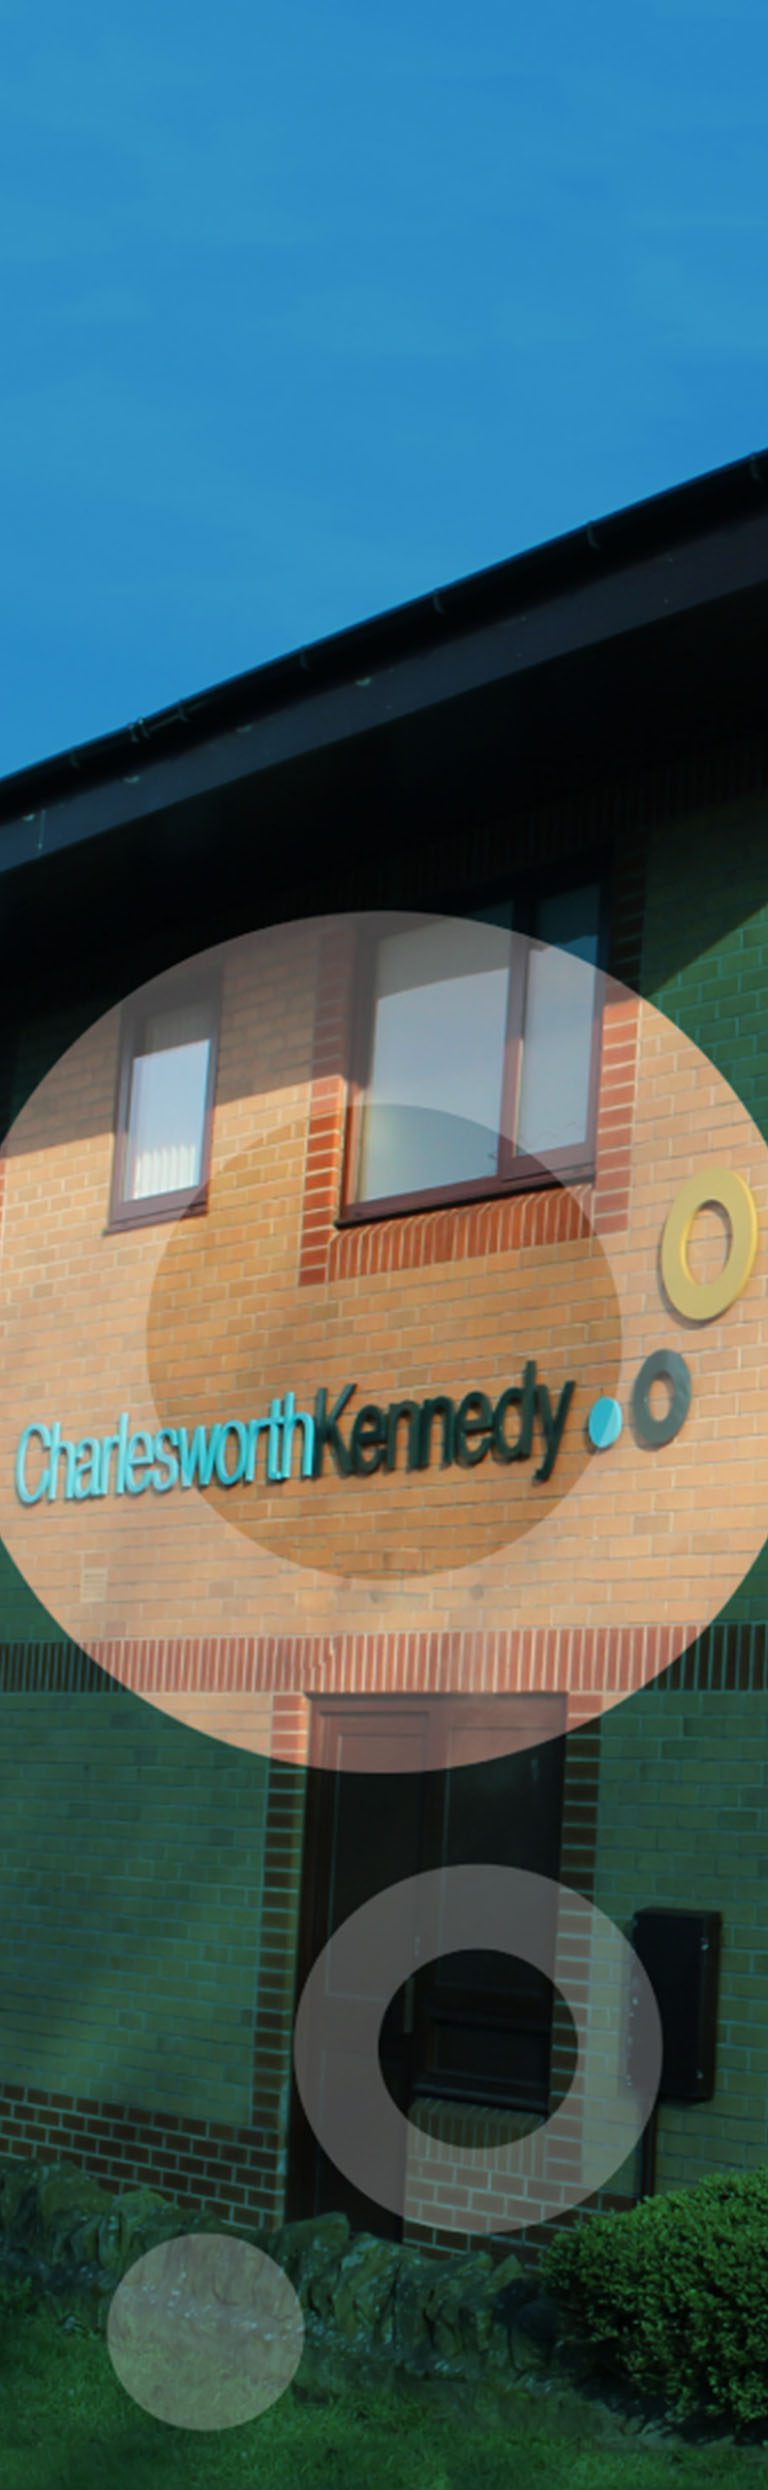 Charlesworth Kennedy - Join our team